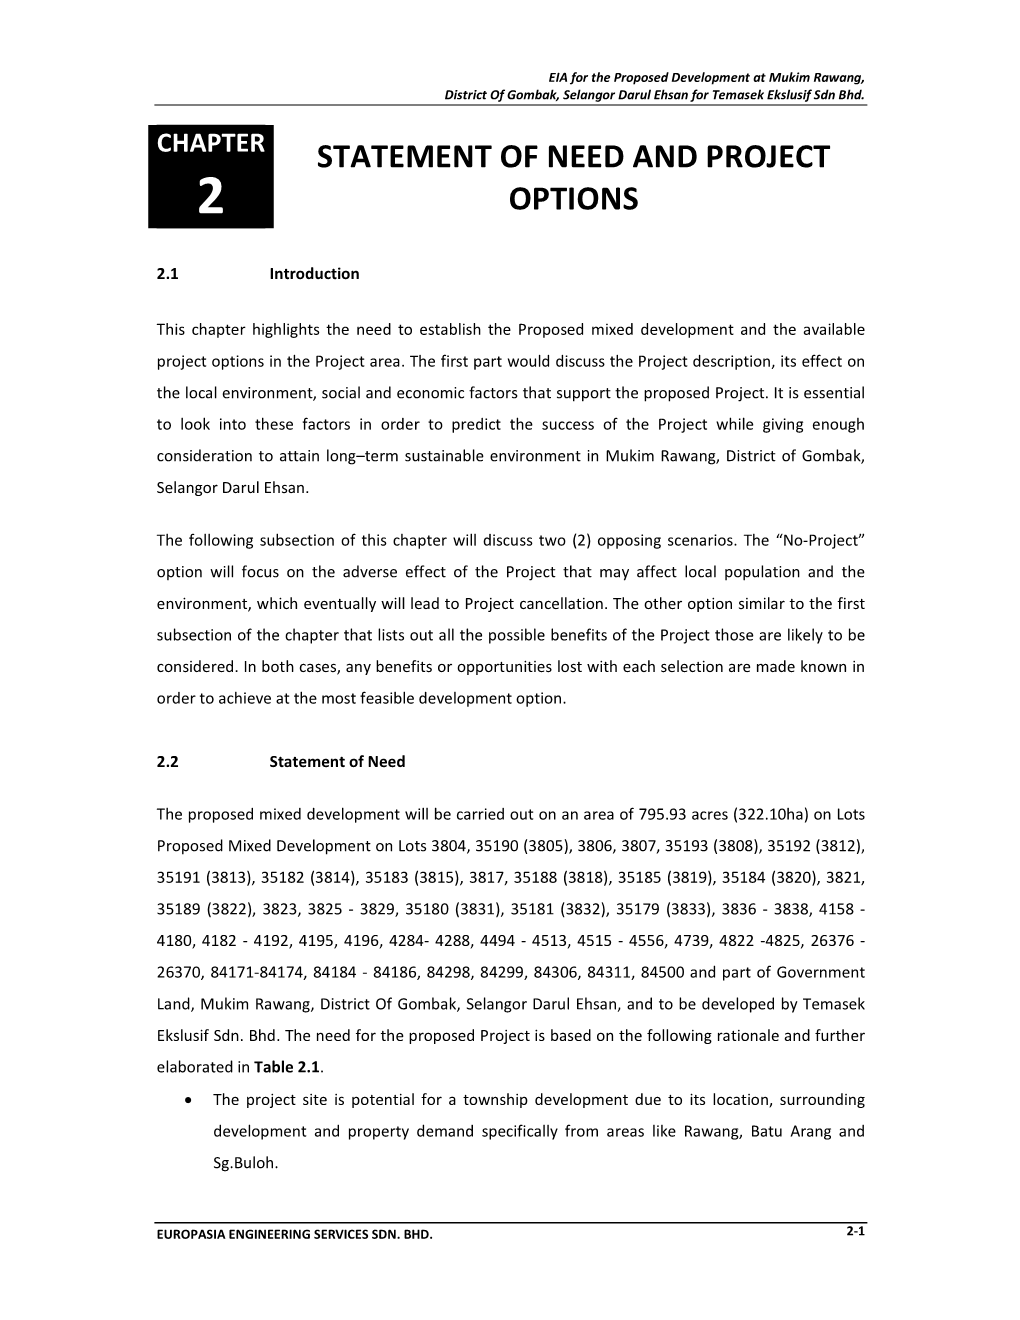 Statement of Need and Project Options